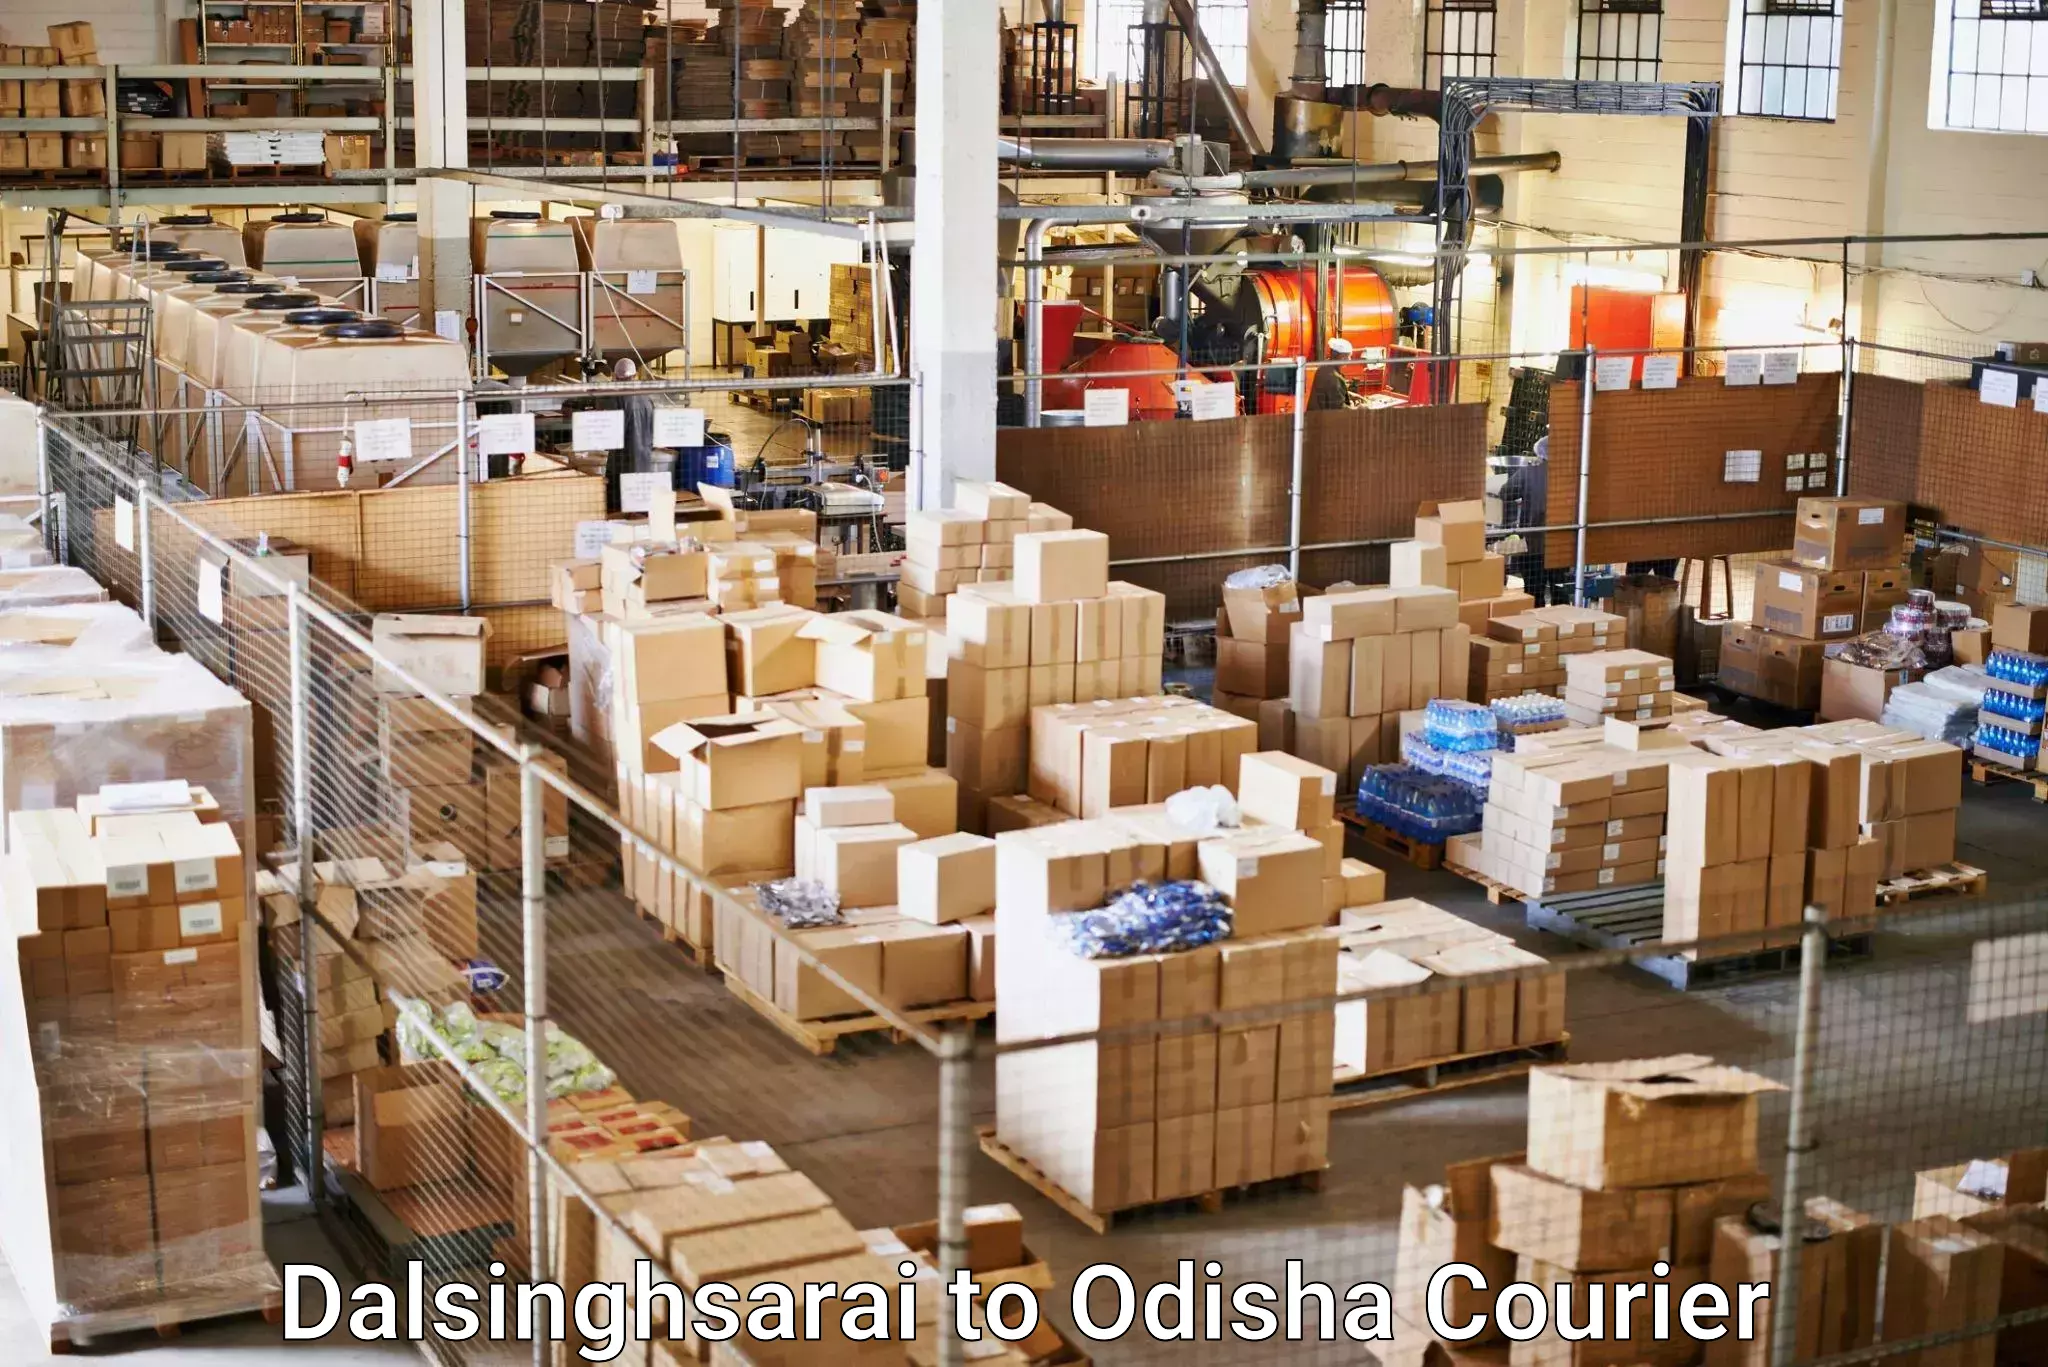 Cost-effective courier options Dalsinghsarai to Basta